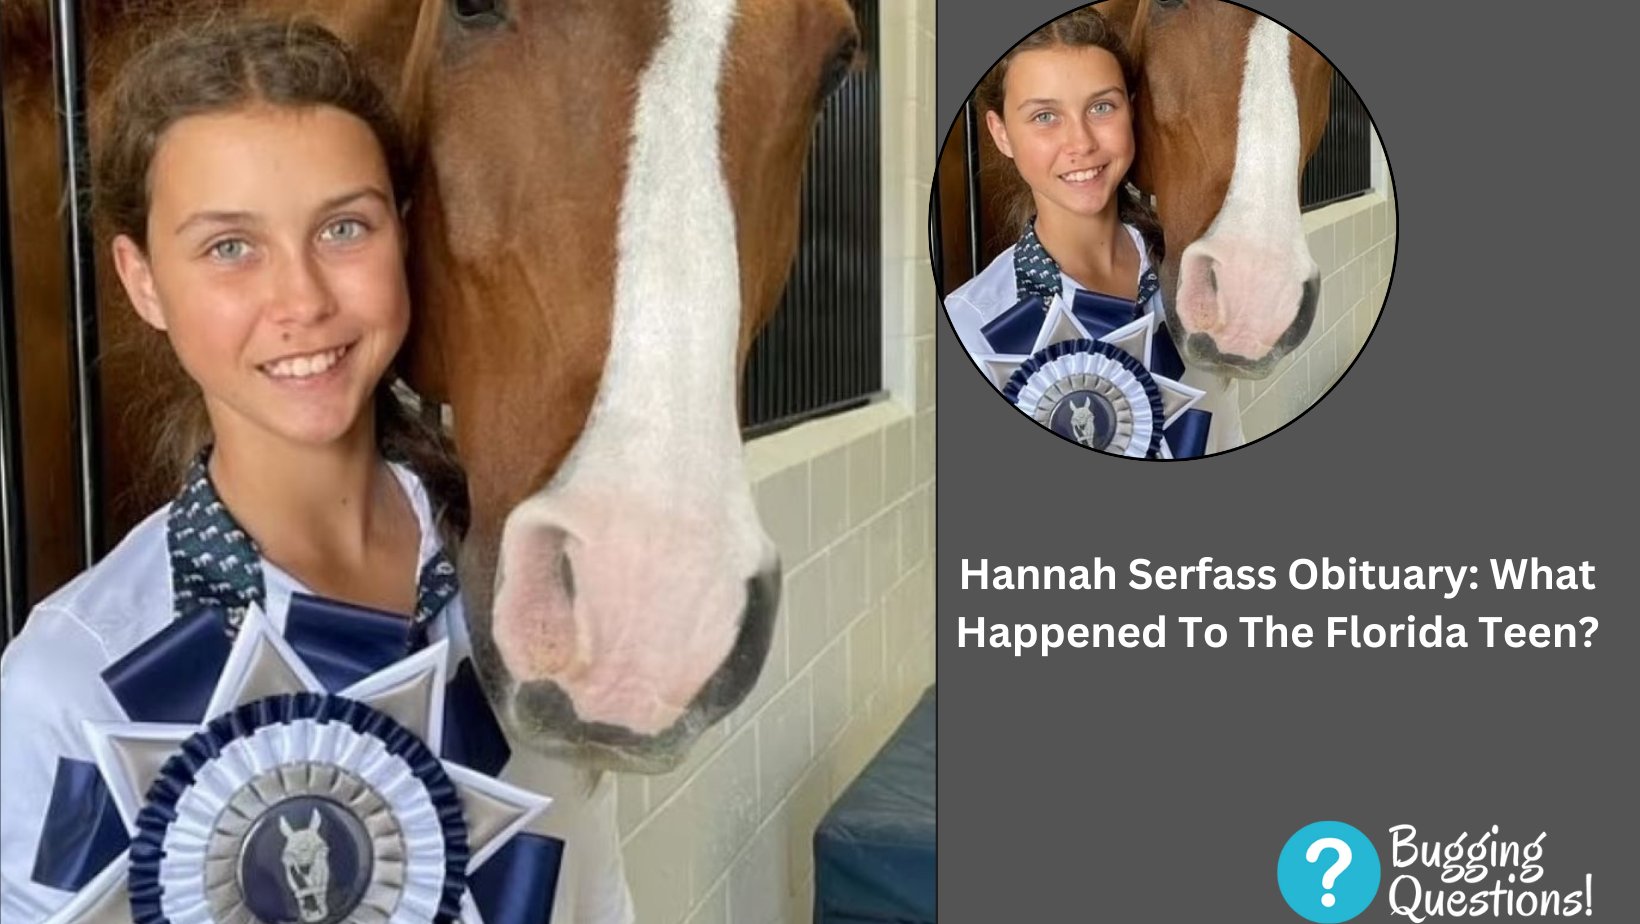 Hannah Serfass Obituary: What Happened To The Florida Teen?